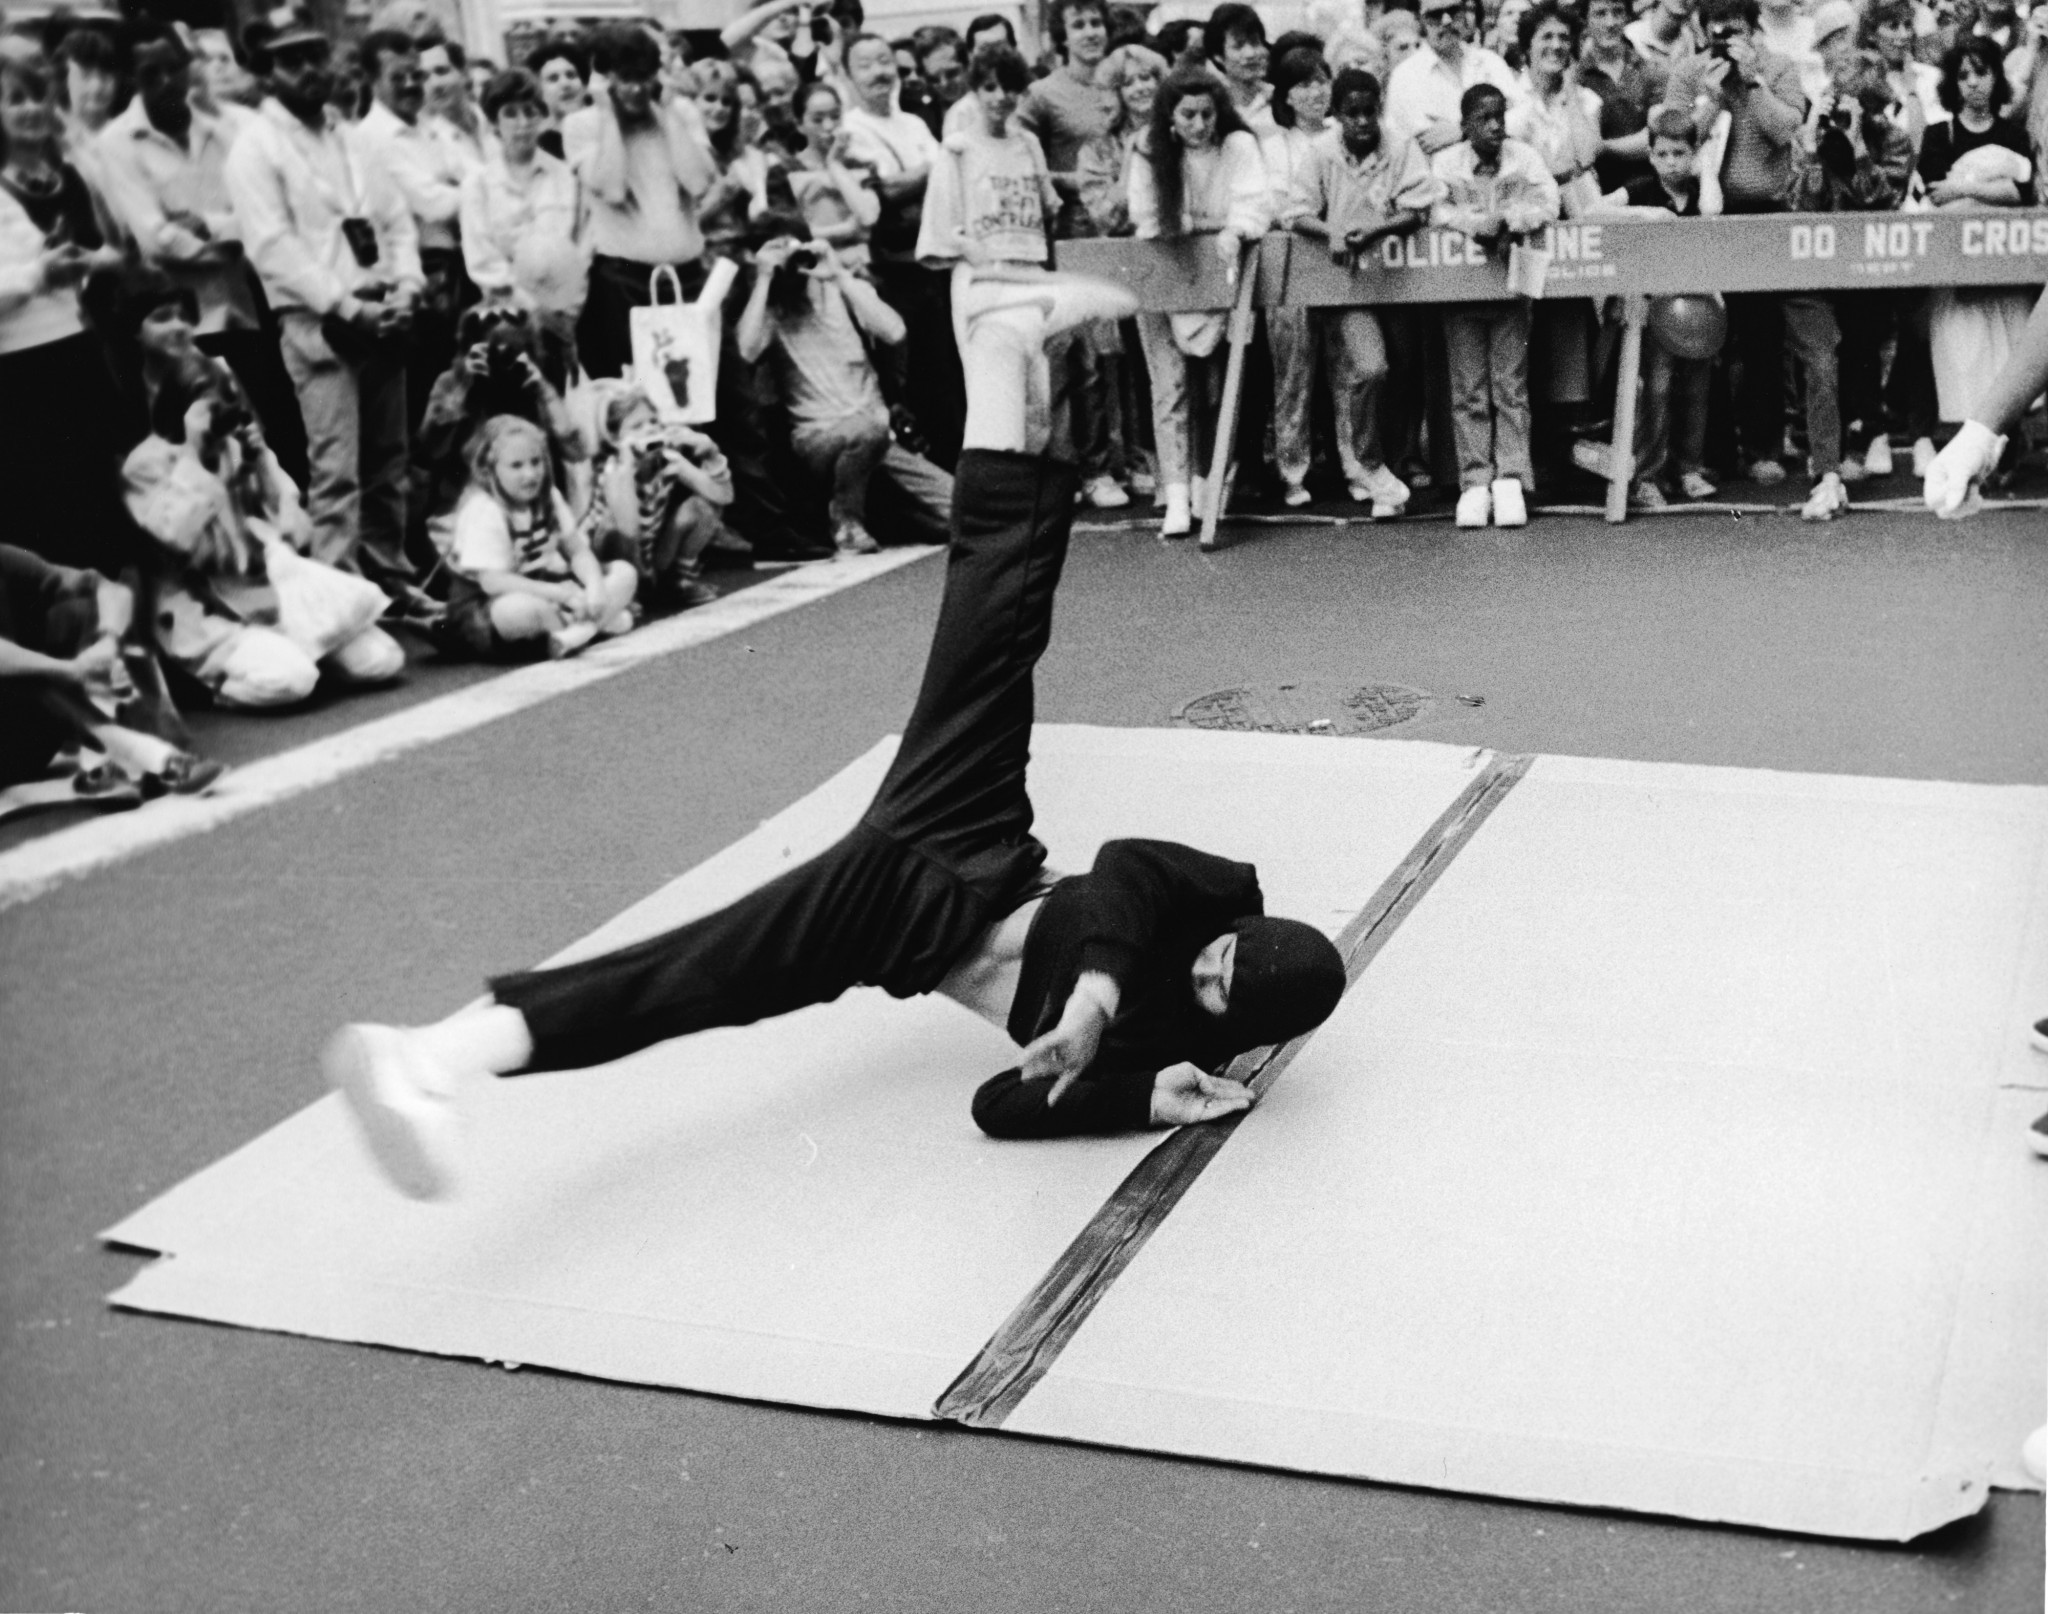 Breakdancing originated in the 1970s in New York City, growing in the 1980s across the United States ©Getty Images